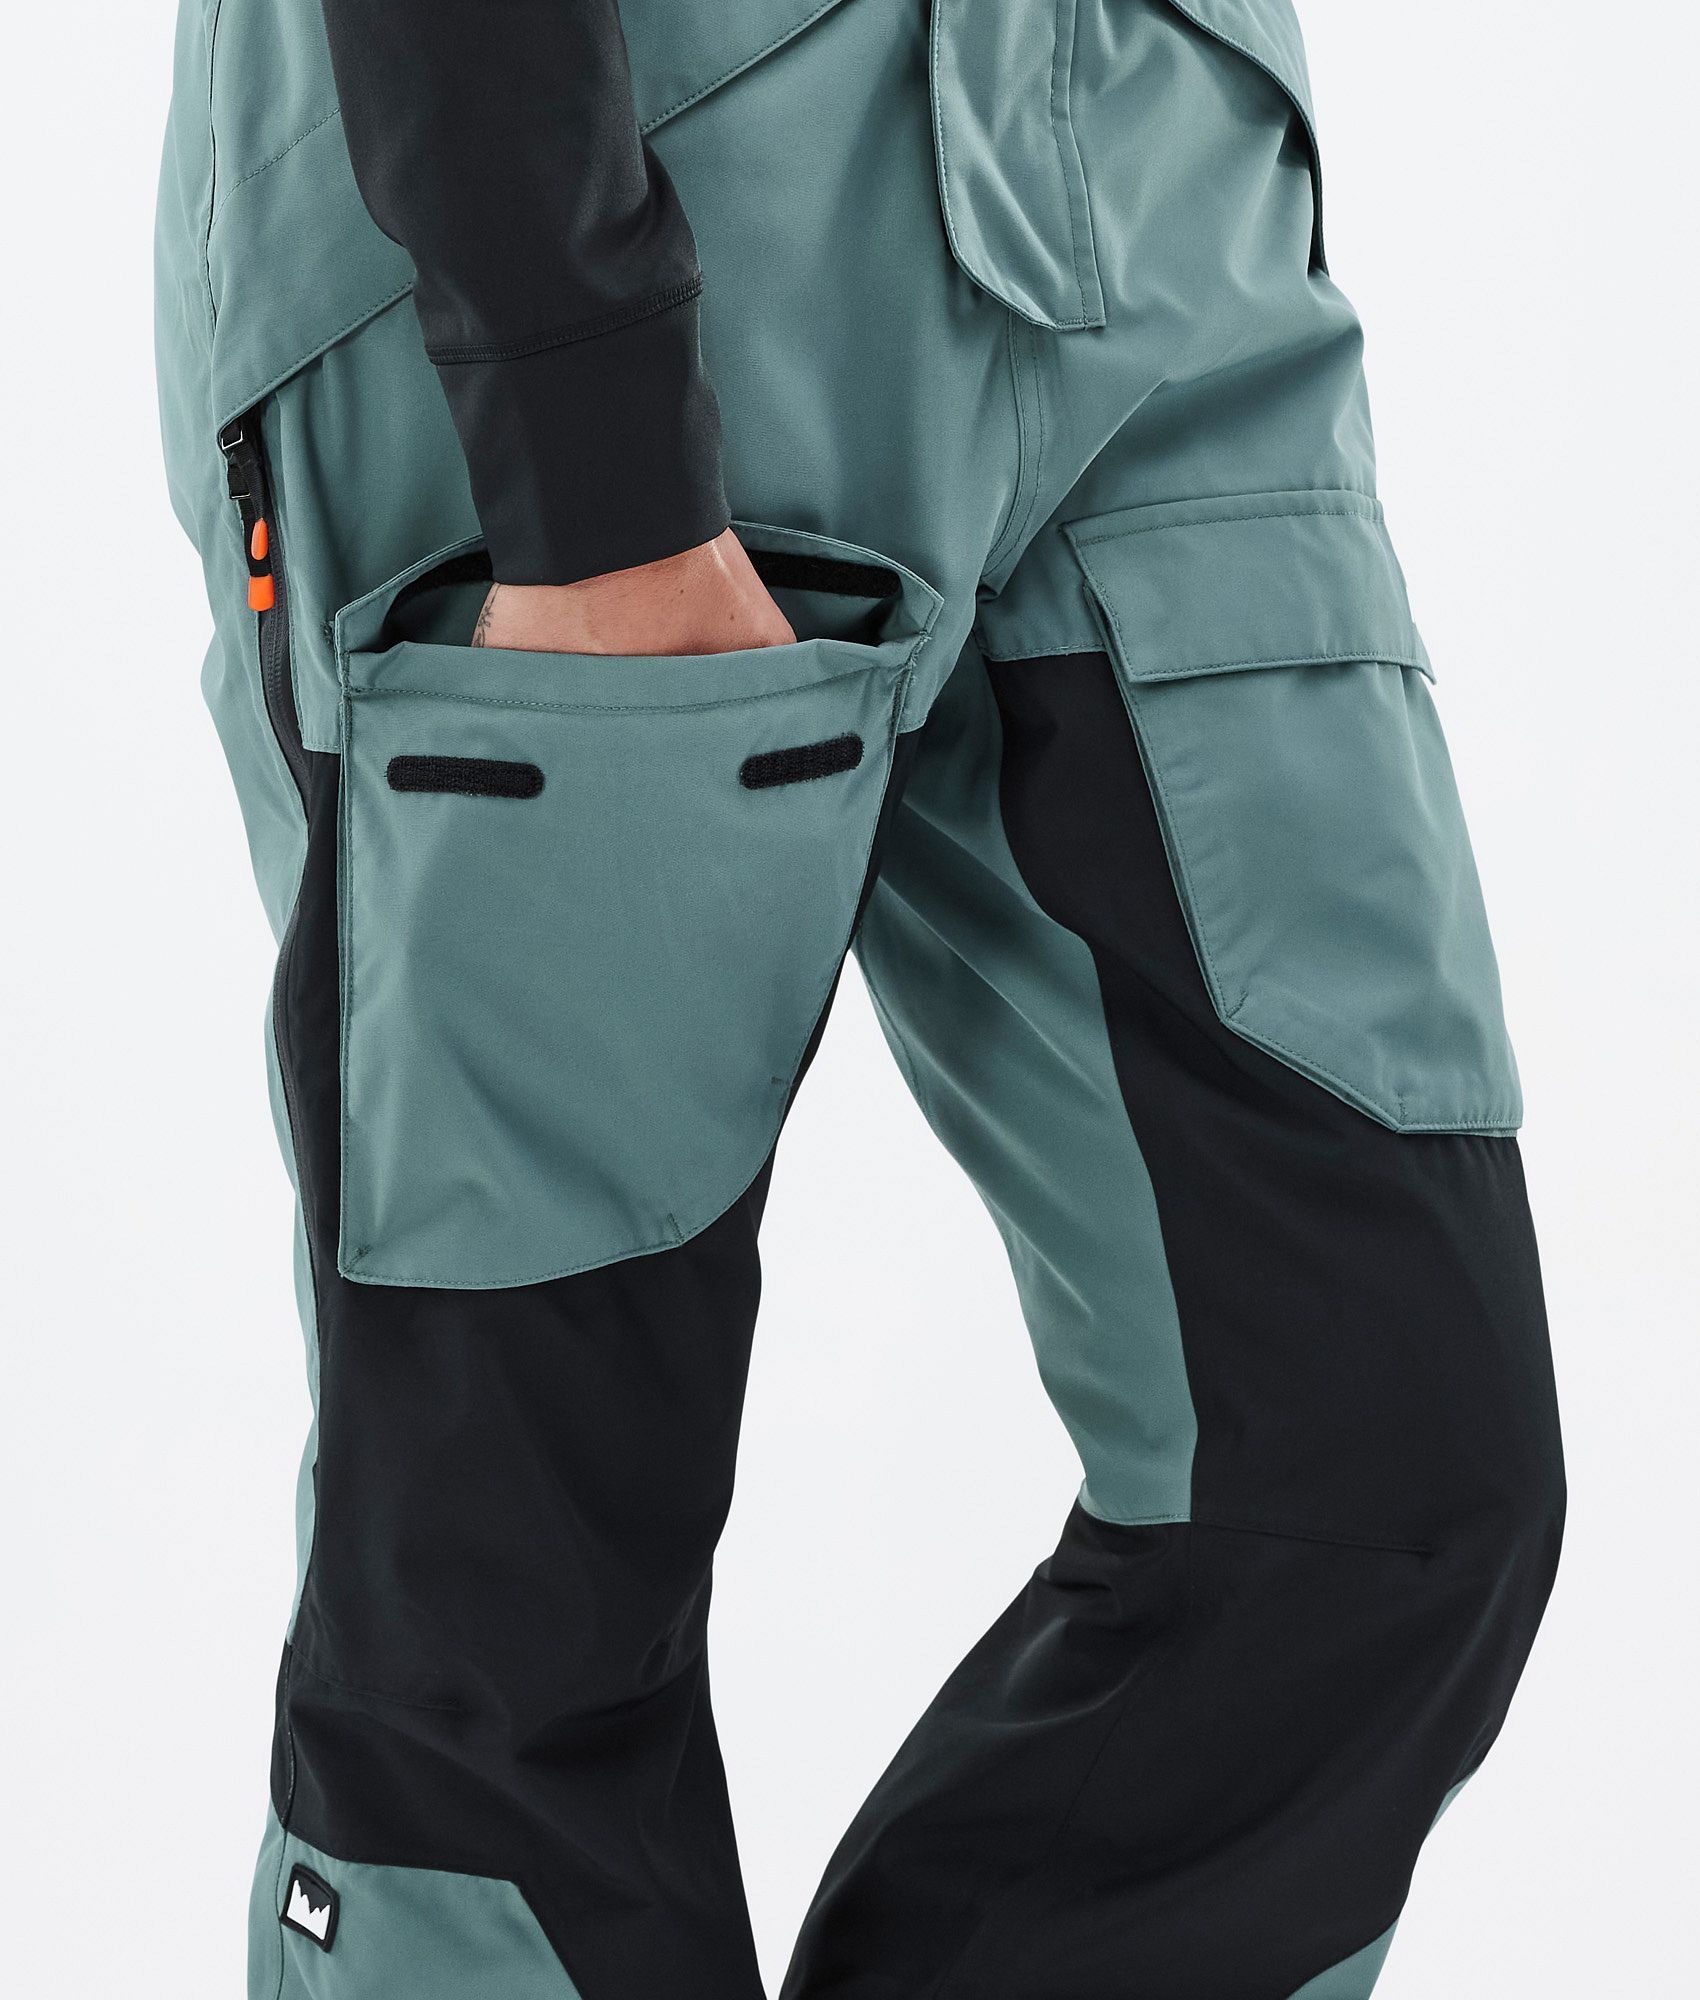 Roxy Rising High Technical Snow/Ski Trousers, Dark Forest, XS